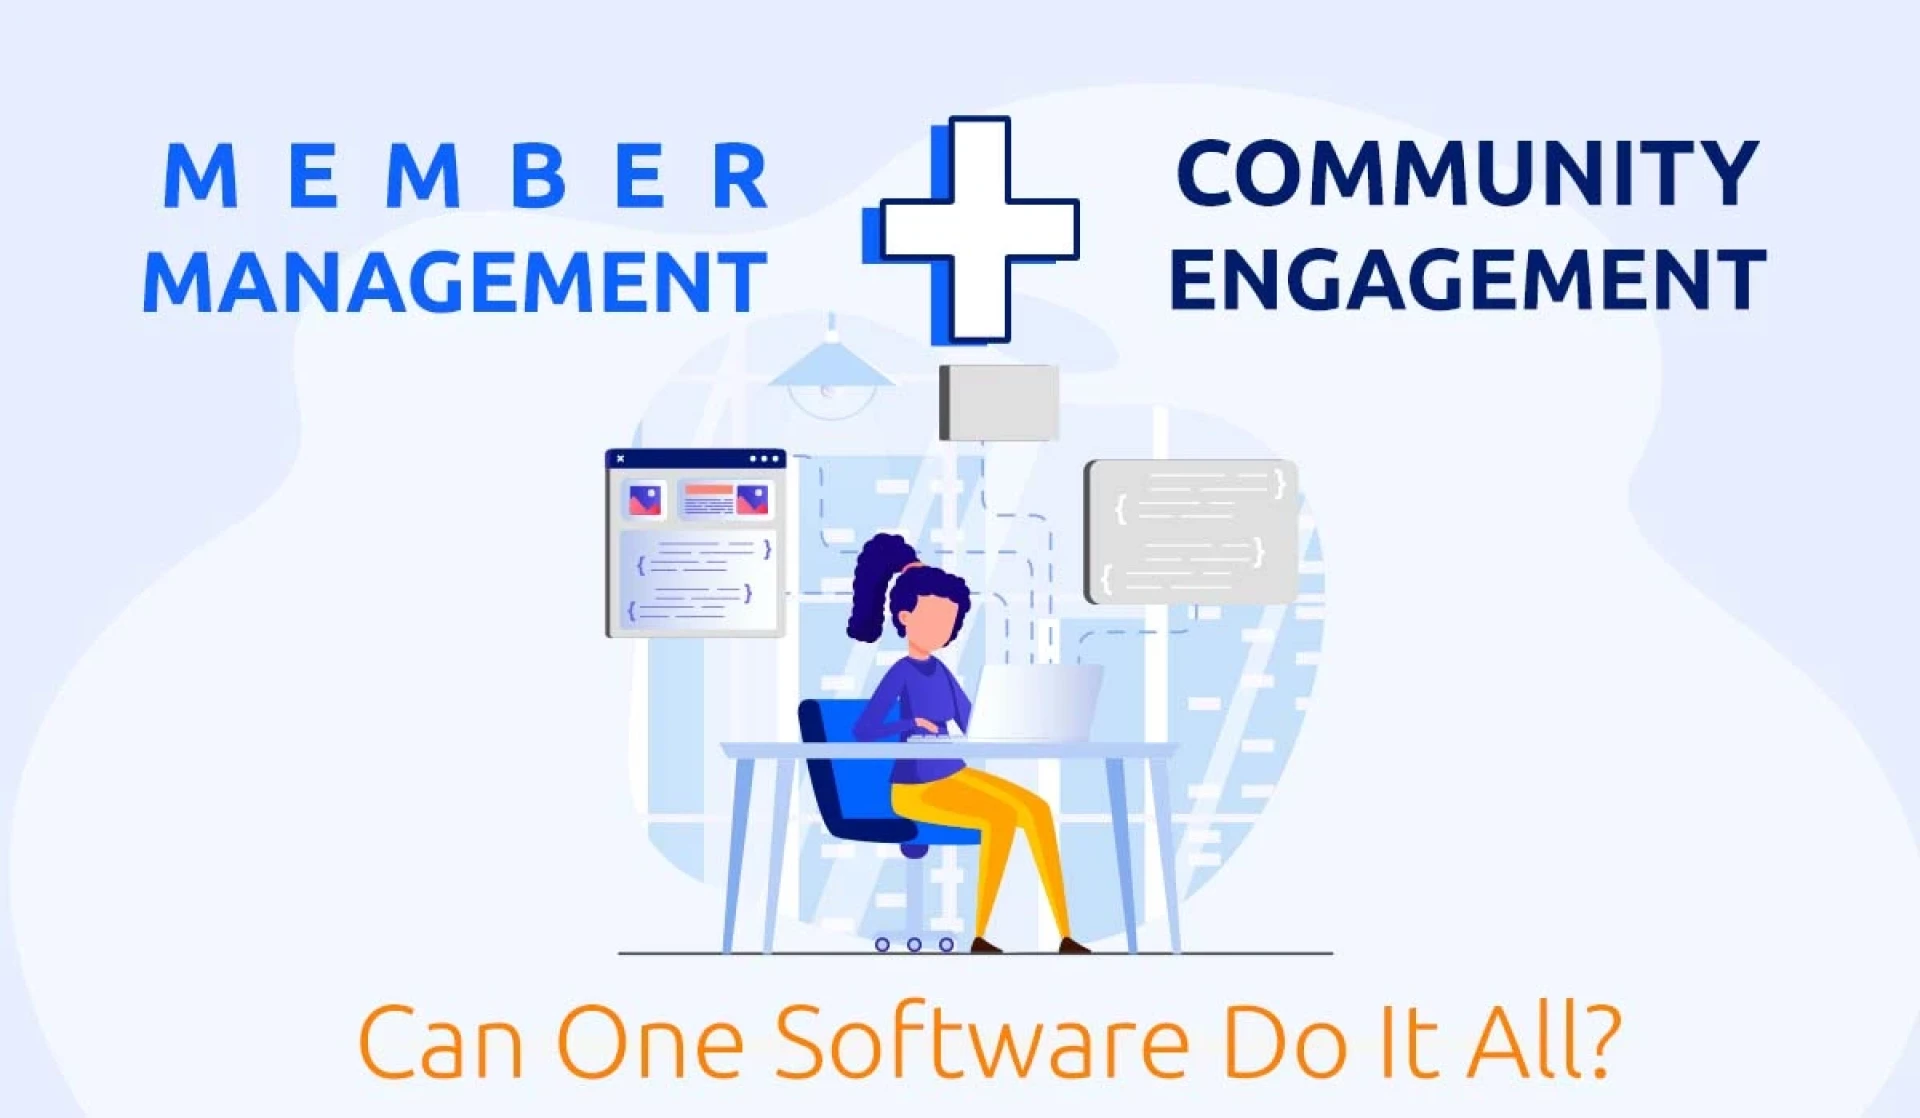 Member Management + Community Engagement: Can One Software Do It All?